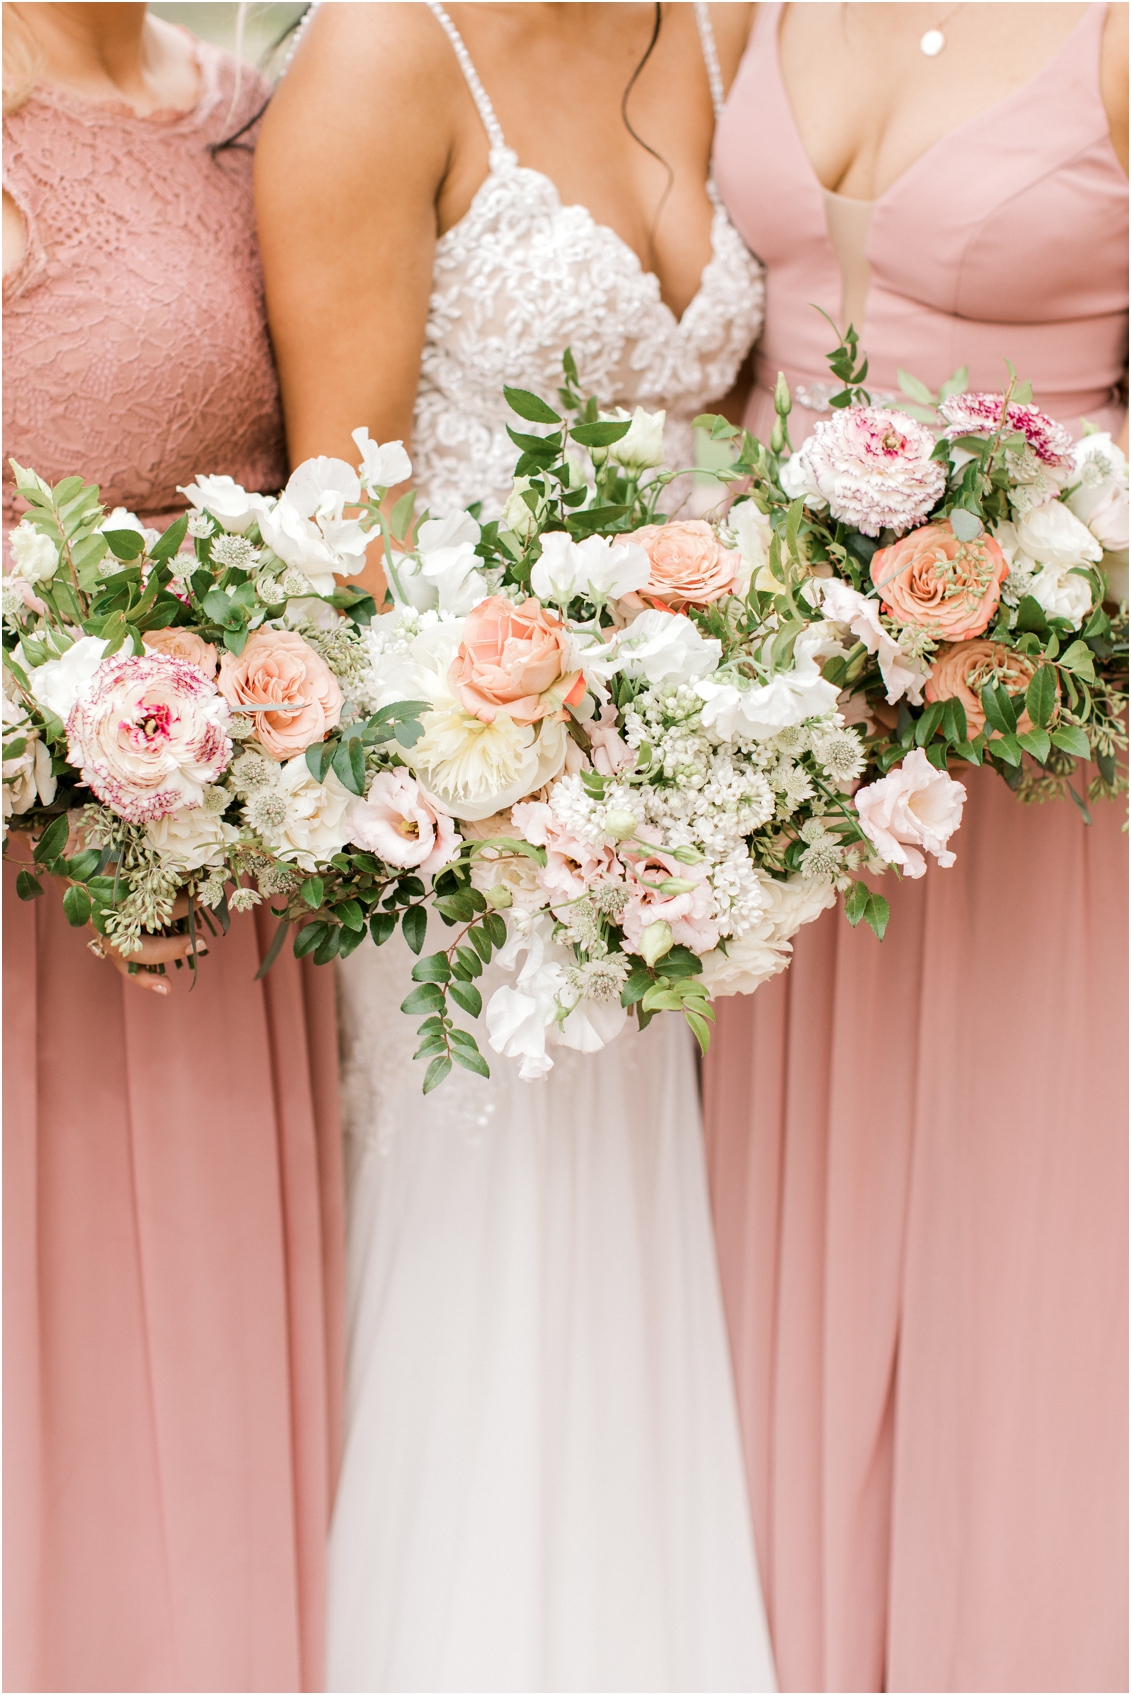 Wedding at Rustic Grace Estate by Gaby Caskey Photography, bridesmaids pictures, blush bridesmaids bouquets